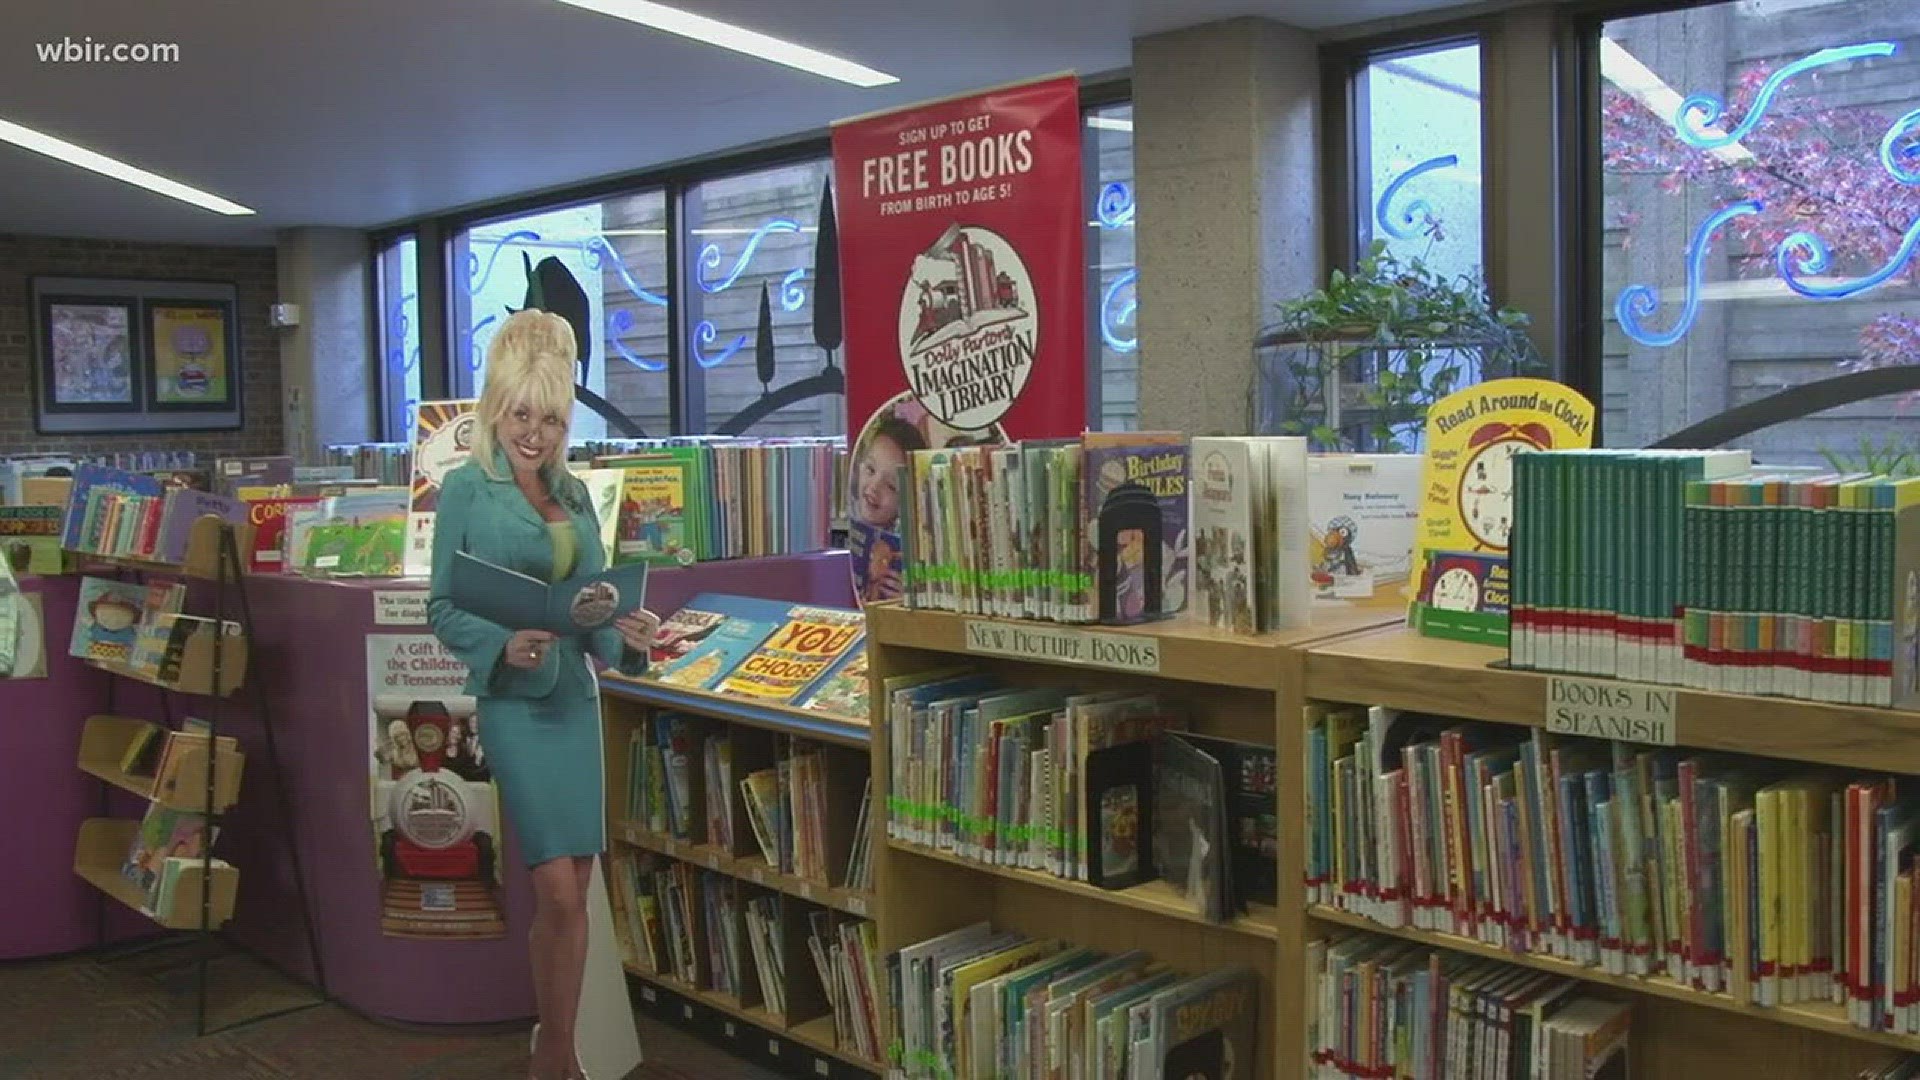 Feb. 20, 2018: Dolly Parton's Imagination Library is donating its 100 millionth book to the Library of Congress.